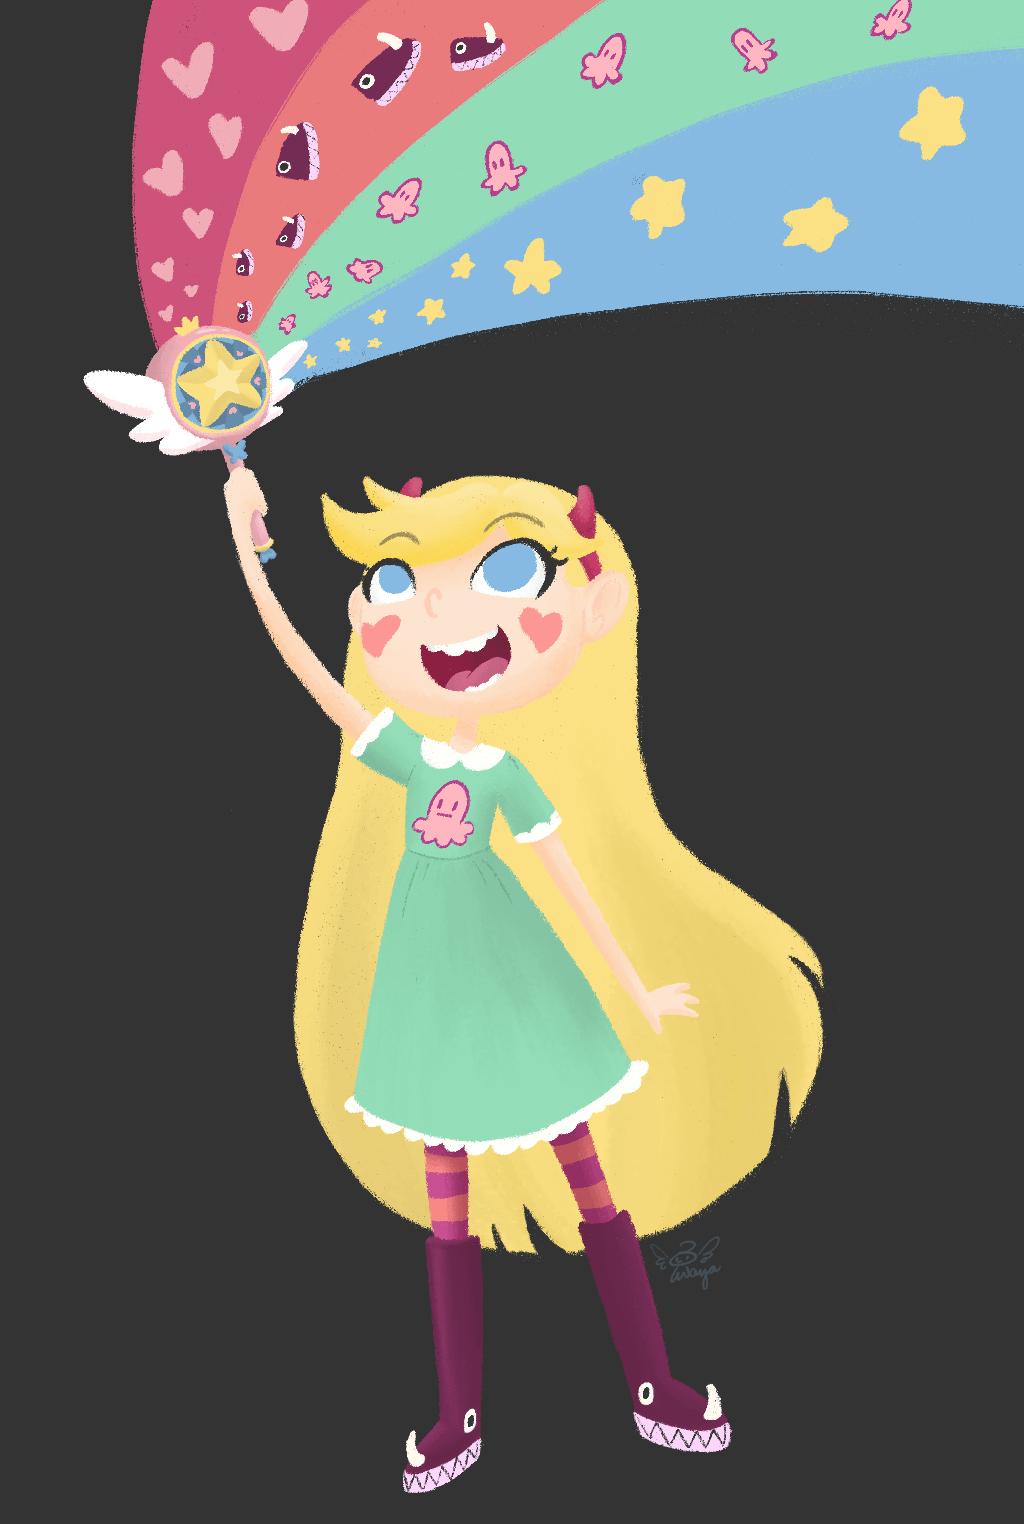 Star Vs The Forces Of Evil Wallpaper Hd